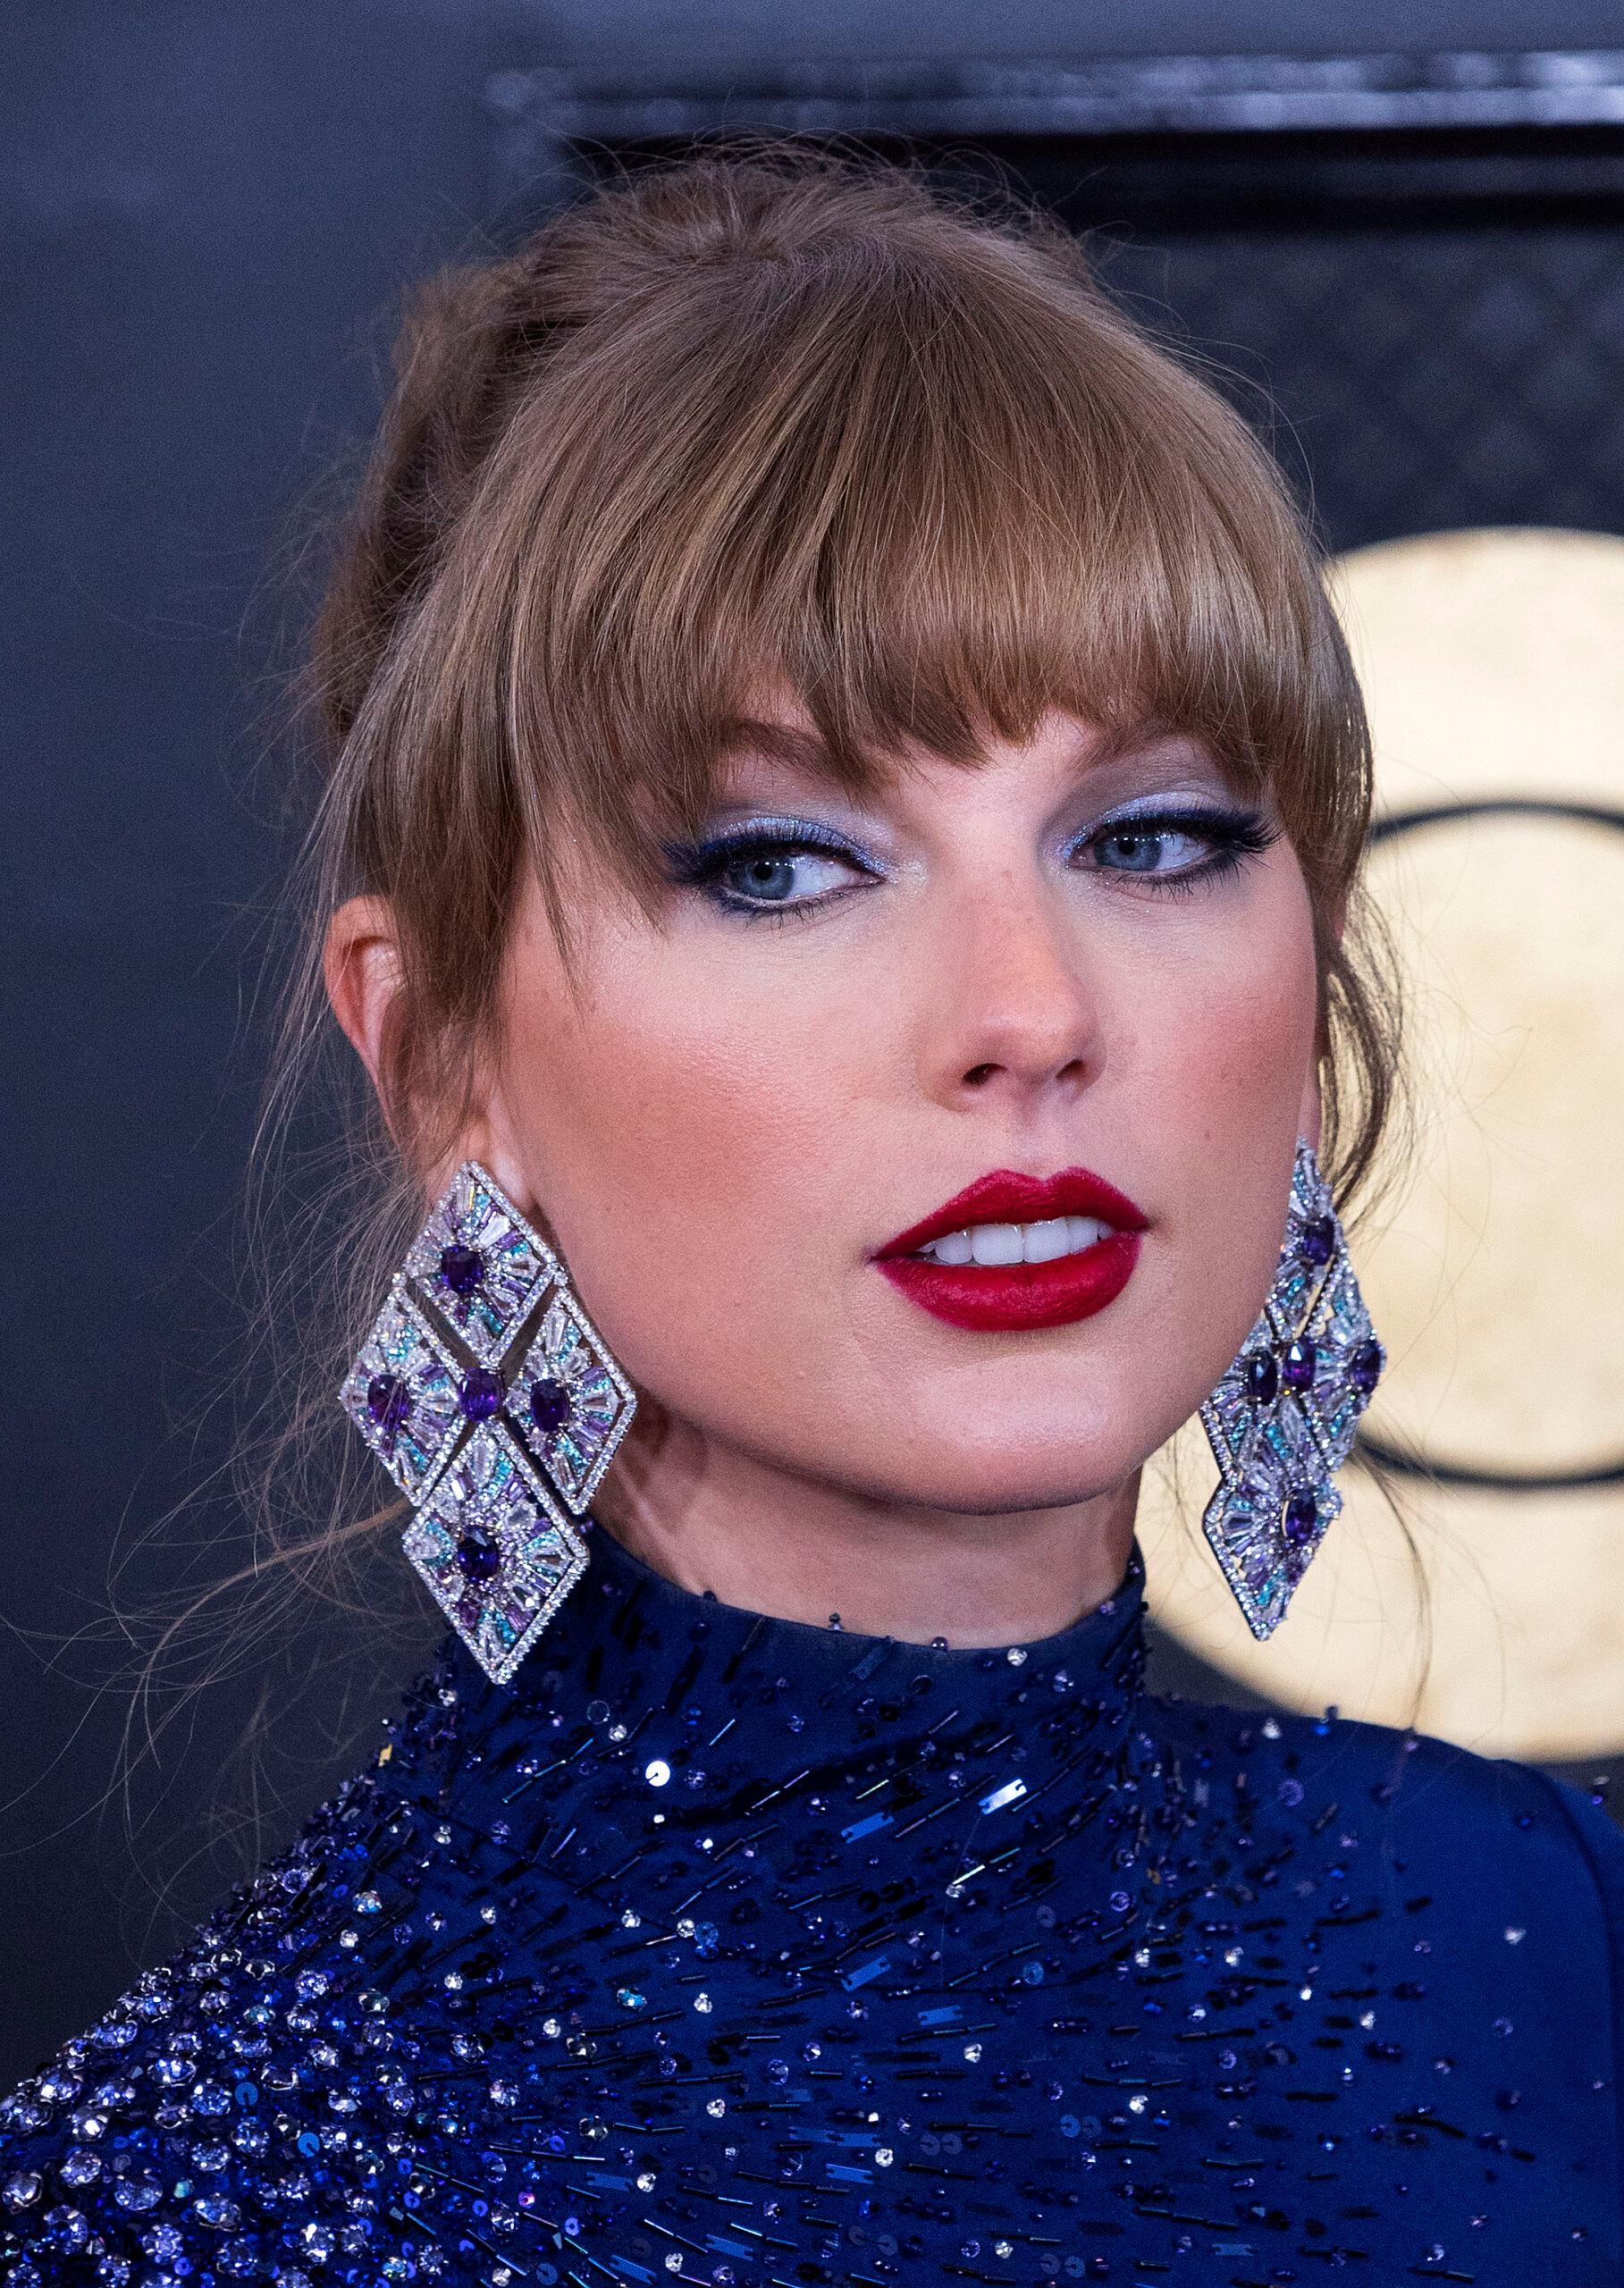 Taylor Swift Shows Some Skin In ‘Midnight’ Blue Grammy Gown